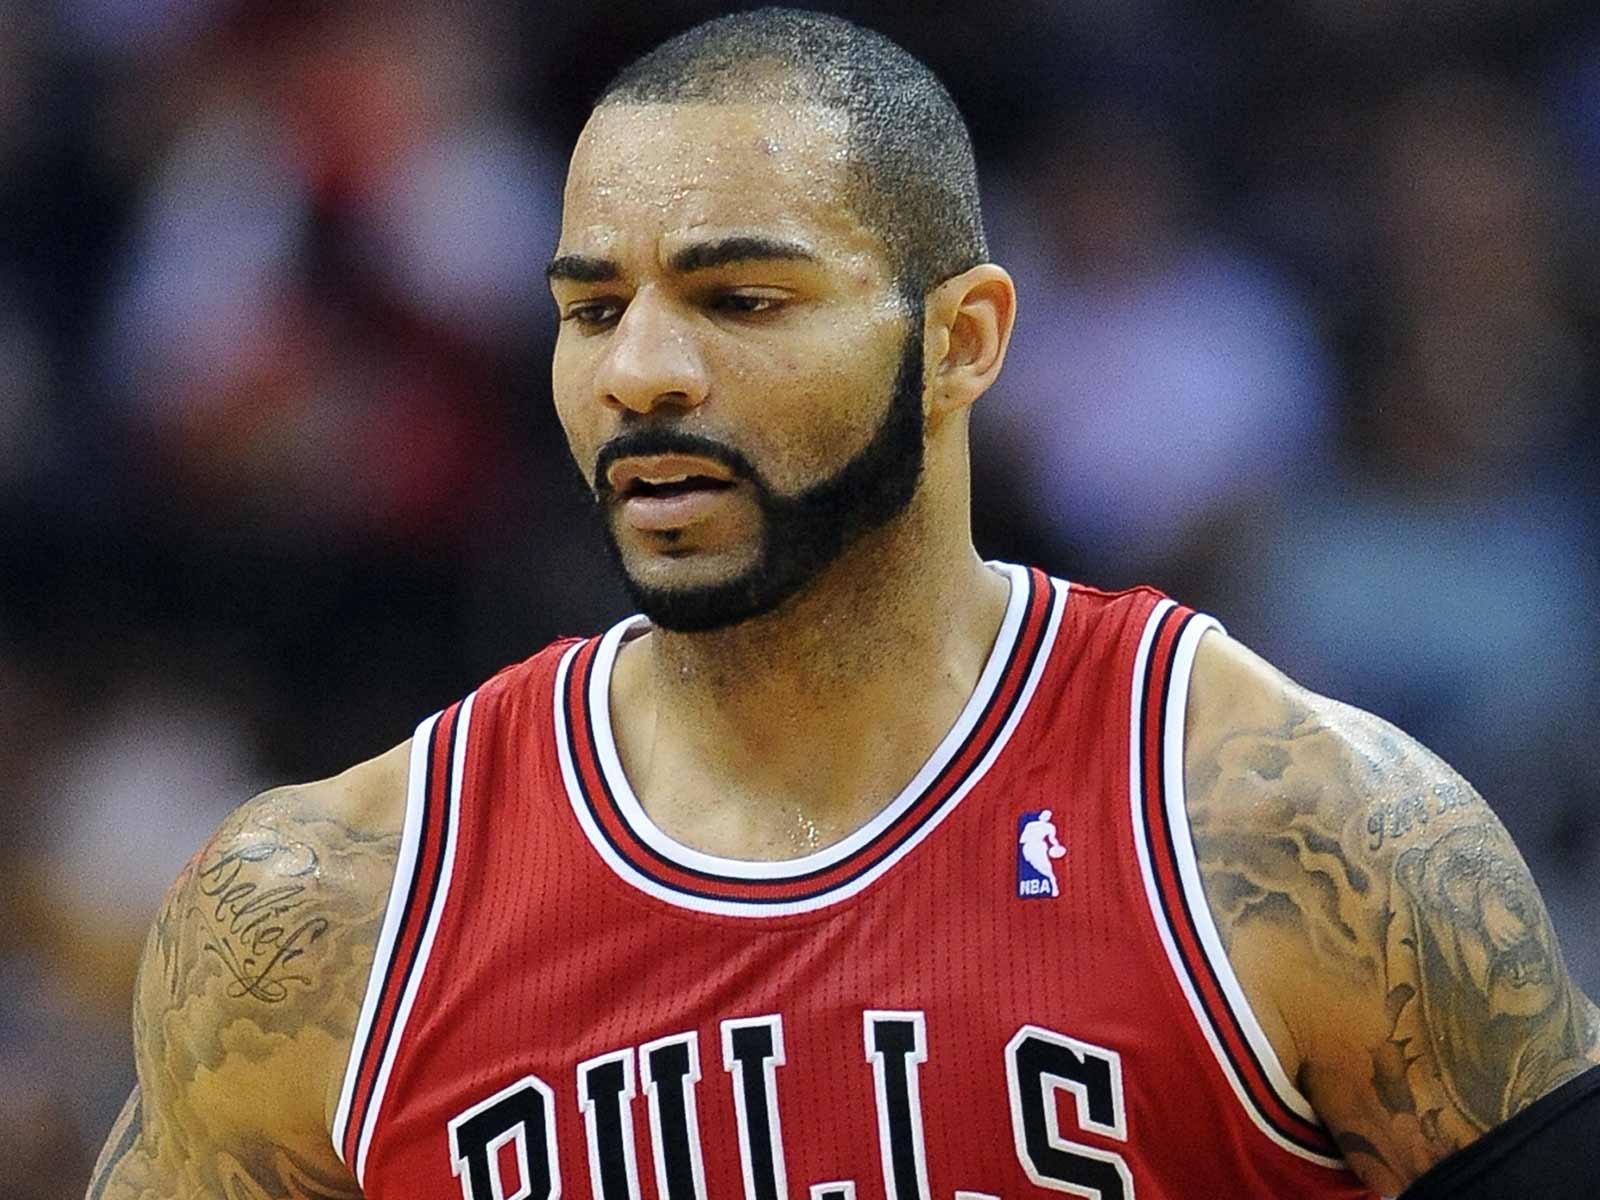 Former NBA Star Carlos Boozer Cuts Child Support Payments to $380 a Month After Career Comes to an End